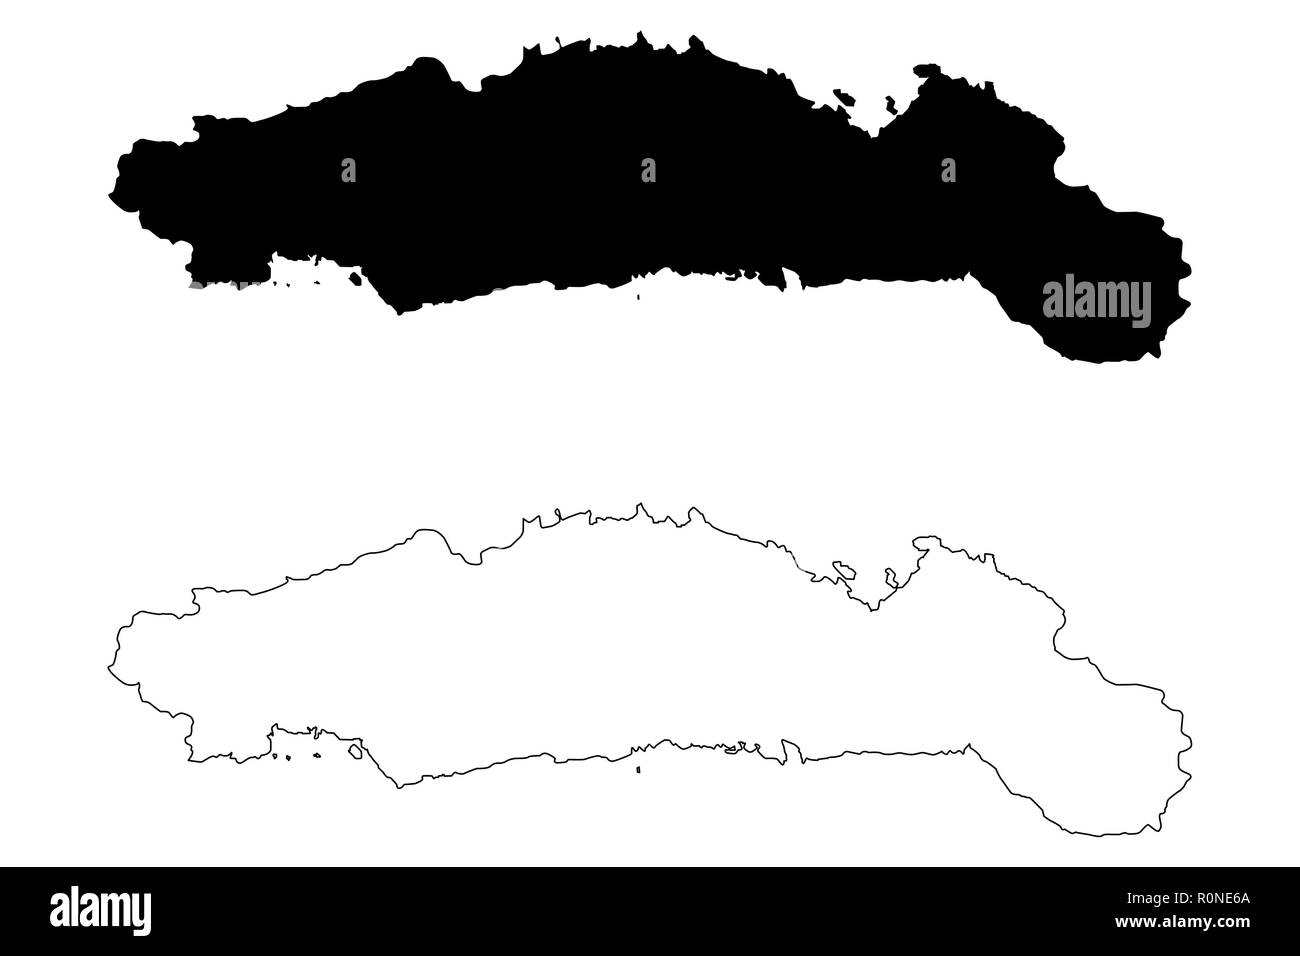 Gorontalo (Subdivisions of Indonesia, Provinces of Indonesia) map vector illustration, scribble sketch Hulontalo map Stock Vector